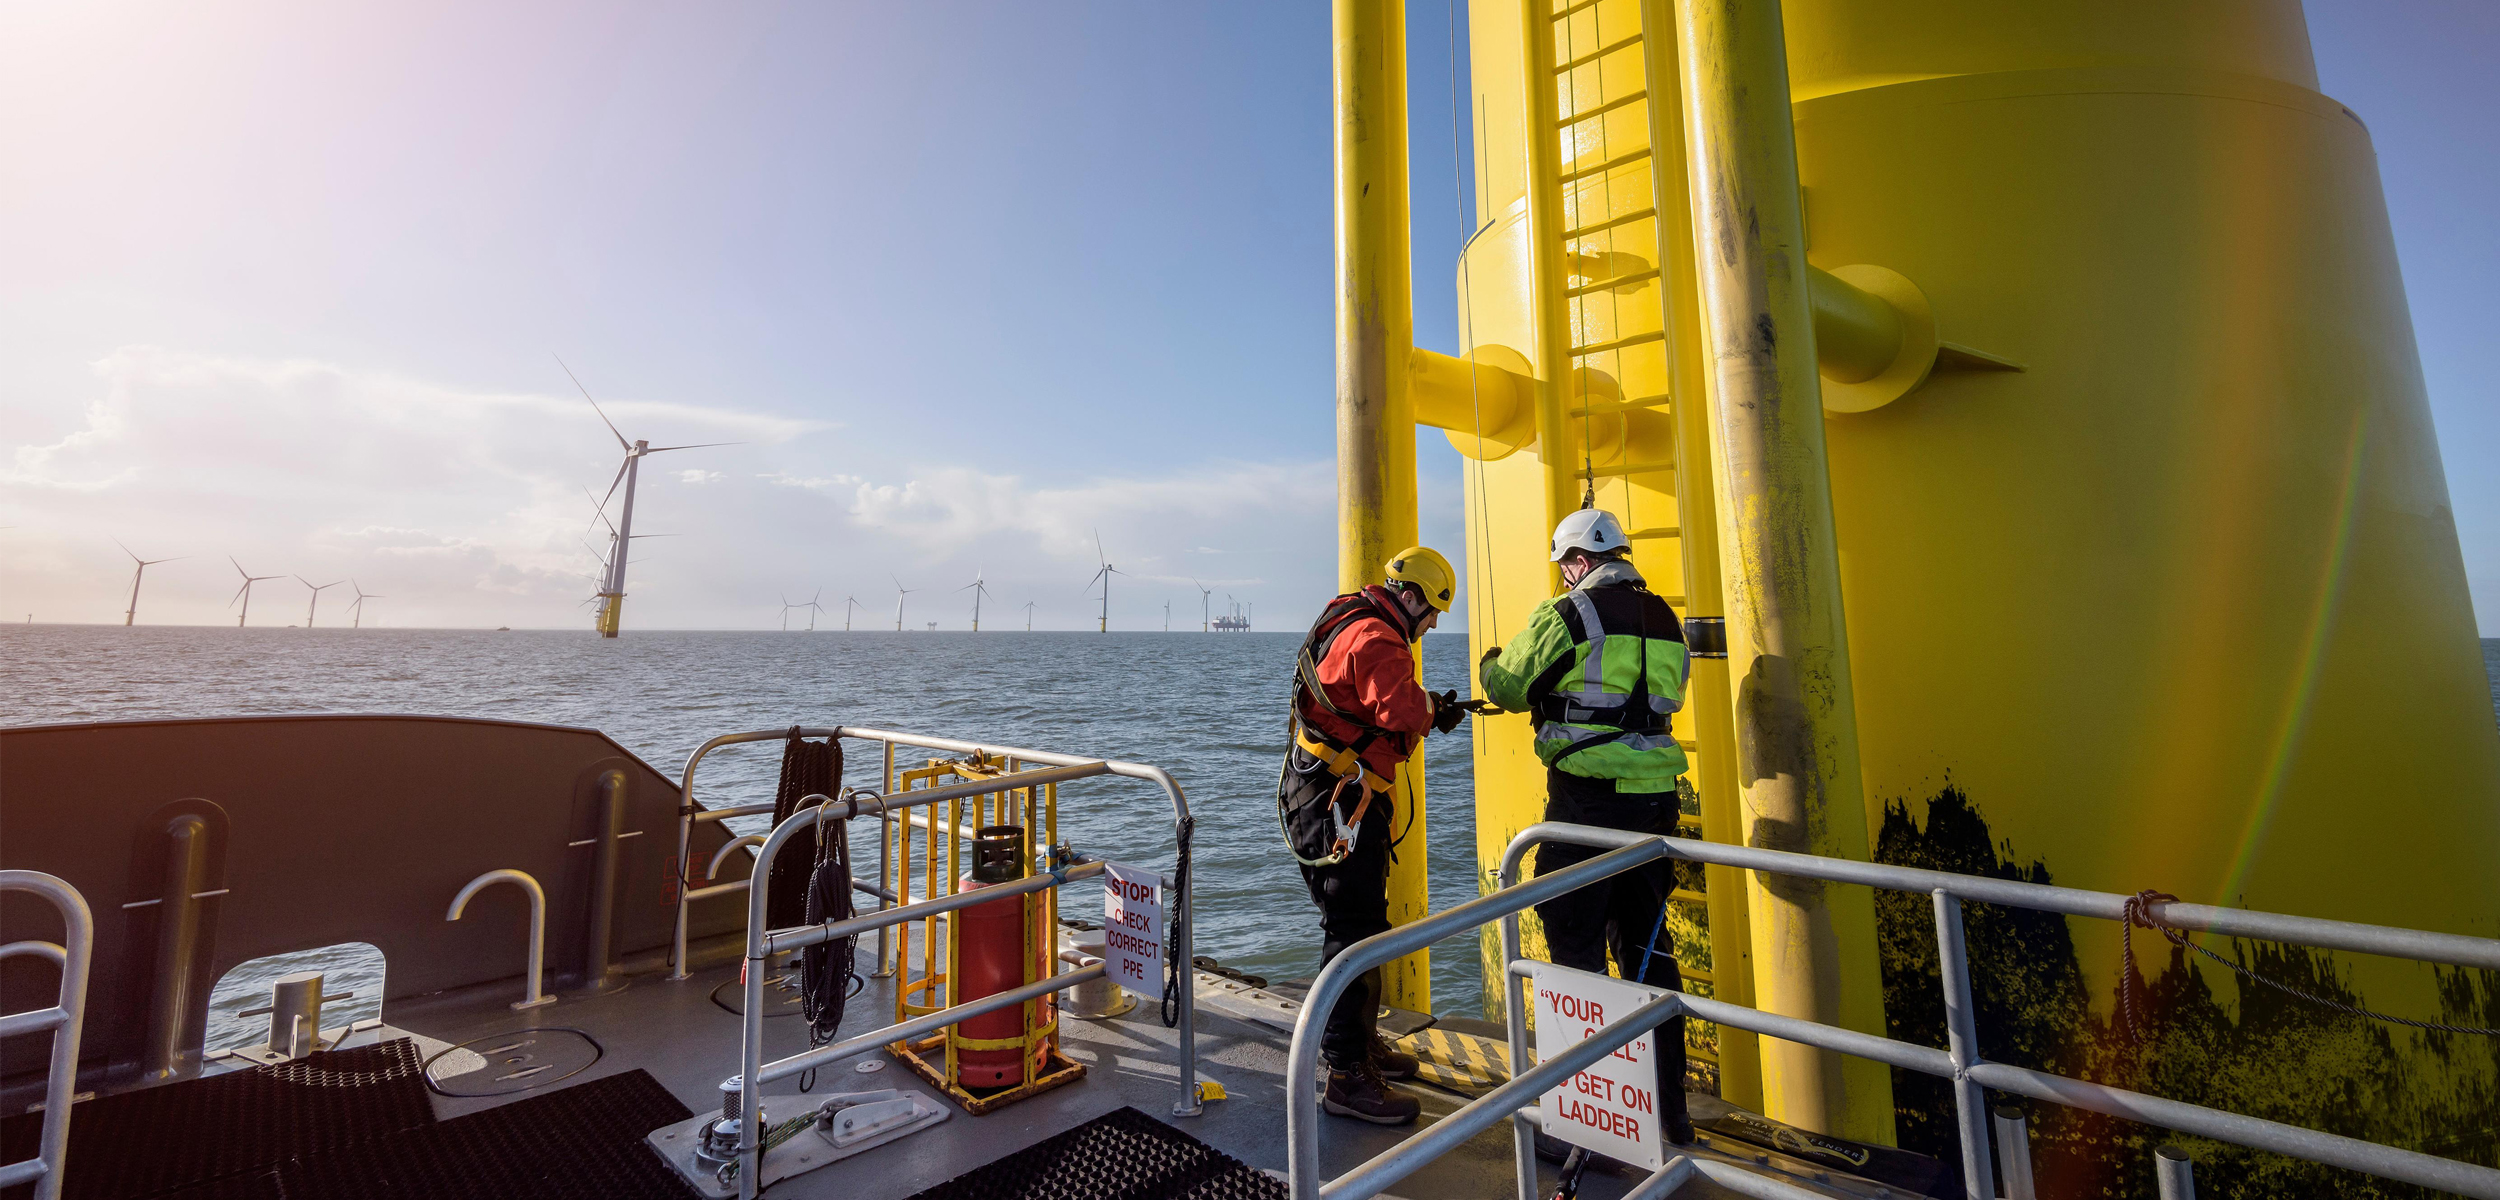 A ship with a large yellow win turbine to the right of the photo. Two men stand in the foreground and in the background you can see many offshore turbines in a blue ocean